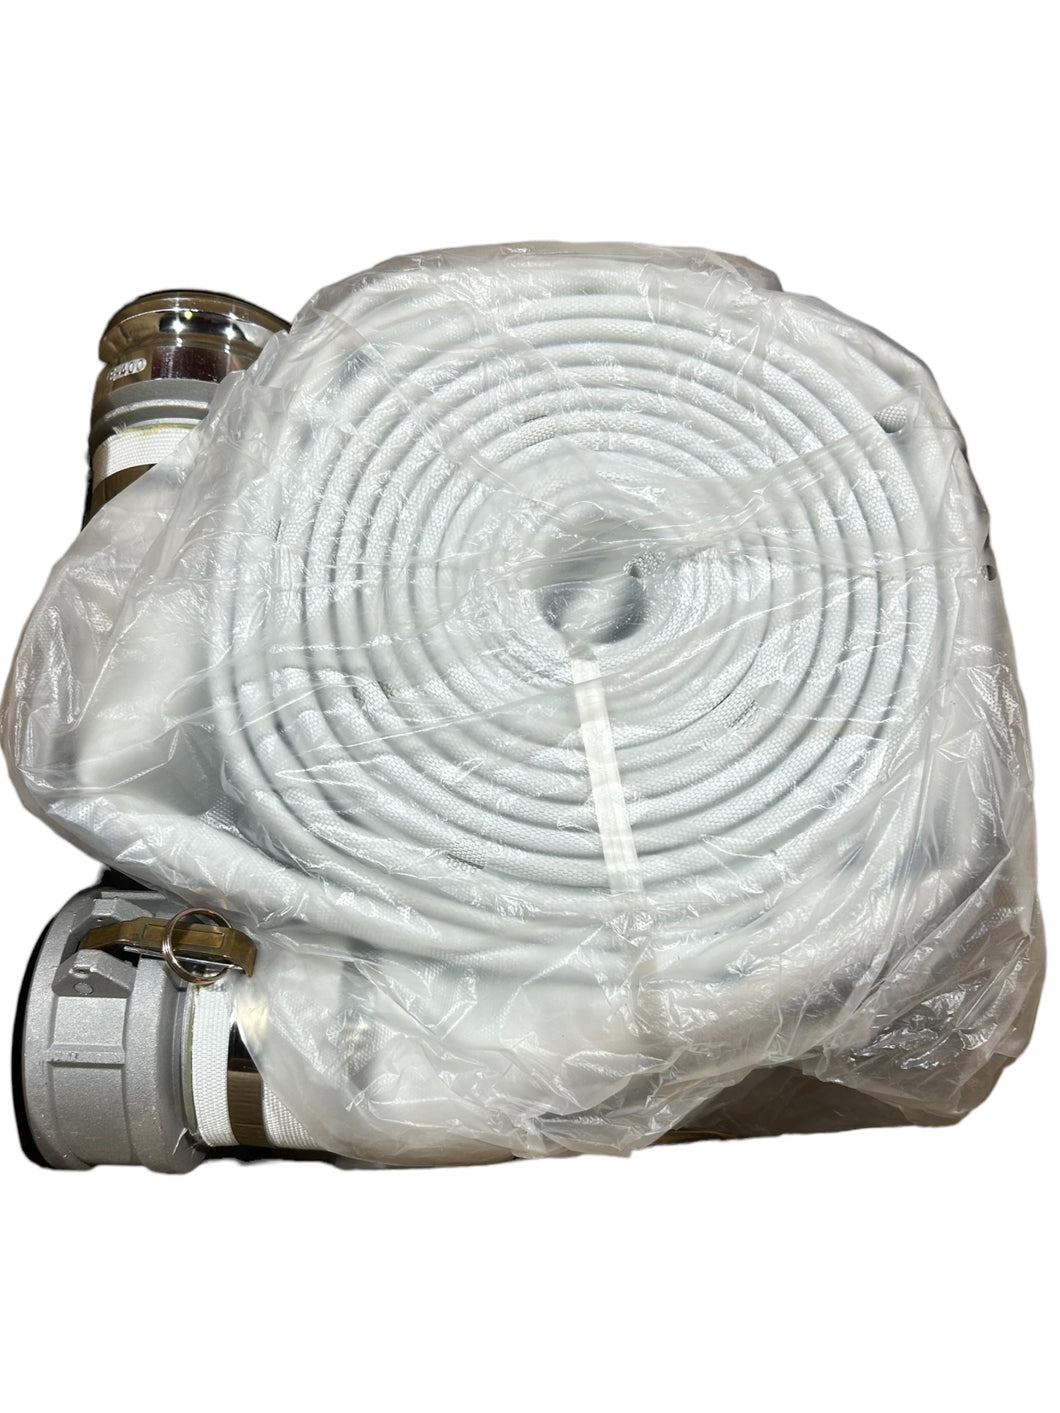 Water Discharge Hose, 4 in Hose Inside Dia., 50 ft Hose Lg, 125 psi, White, 4 in x 4 in Fitting Size - FreemanLiquidators - [product_description]